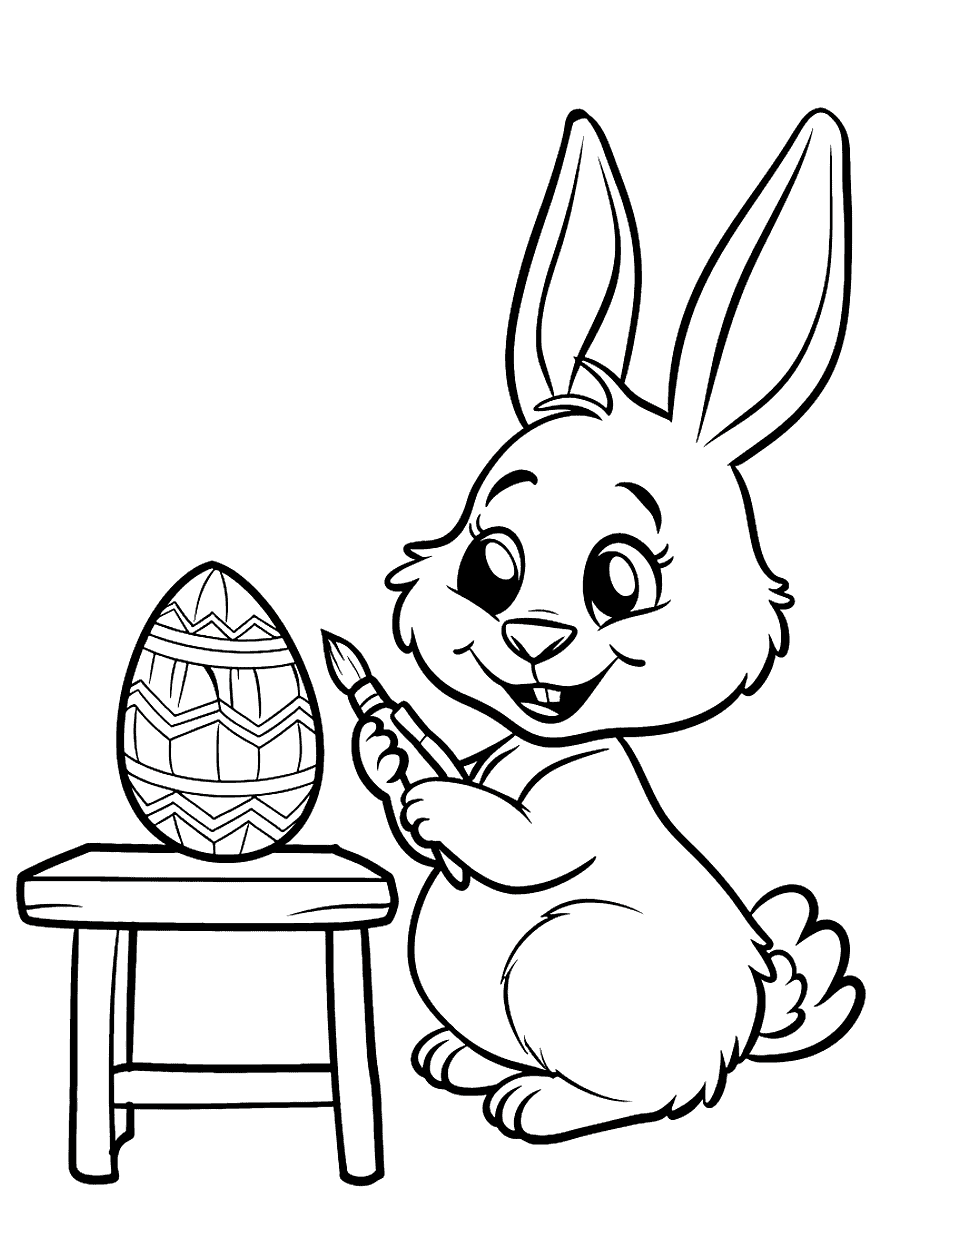 Easter Egg Painting Bunny Coloring Page - A bunny painting an Easter egg with a wide, happy smile, sitting at a small table.